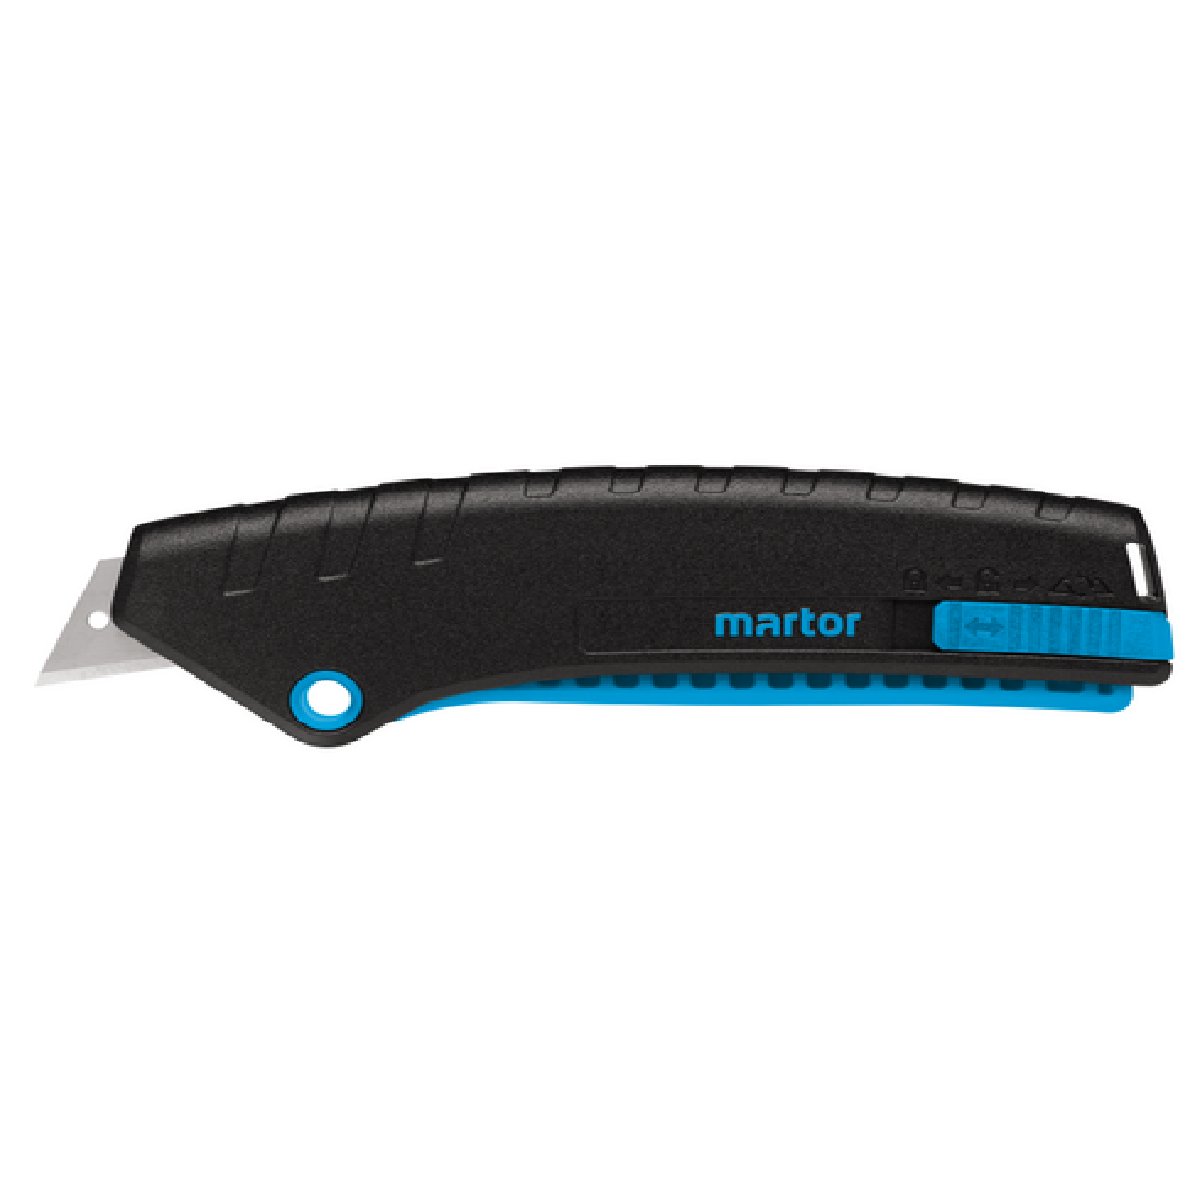 MARTOR SECUNORM MIZAR NO. 125001 Squeeze And Cut Safety Knife